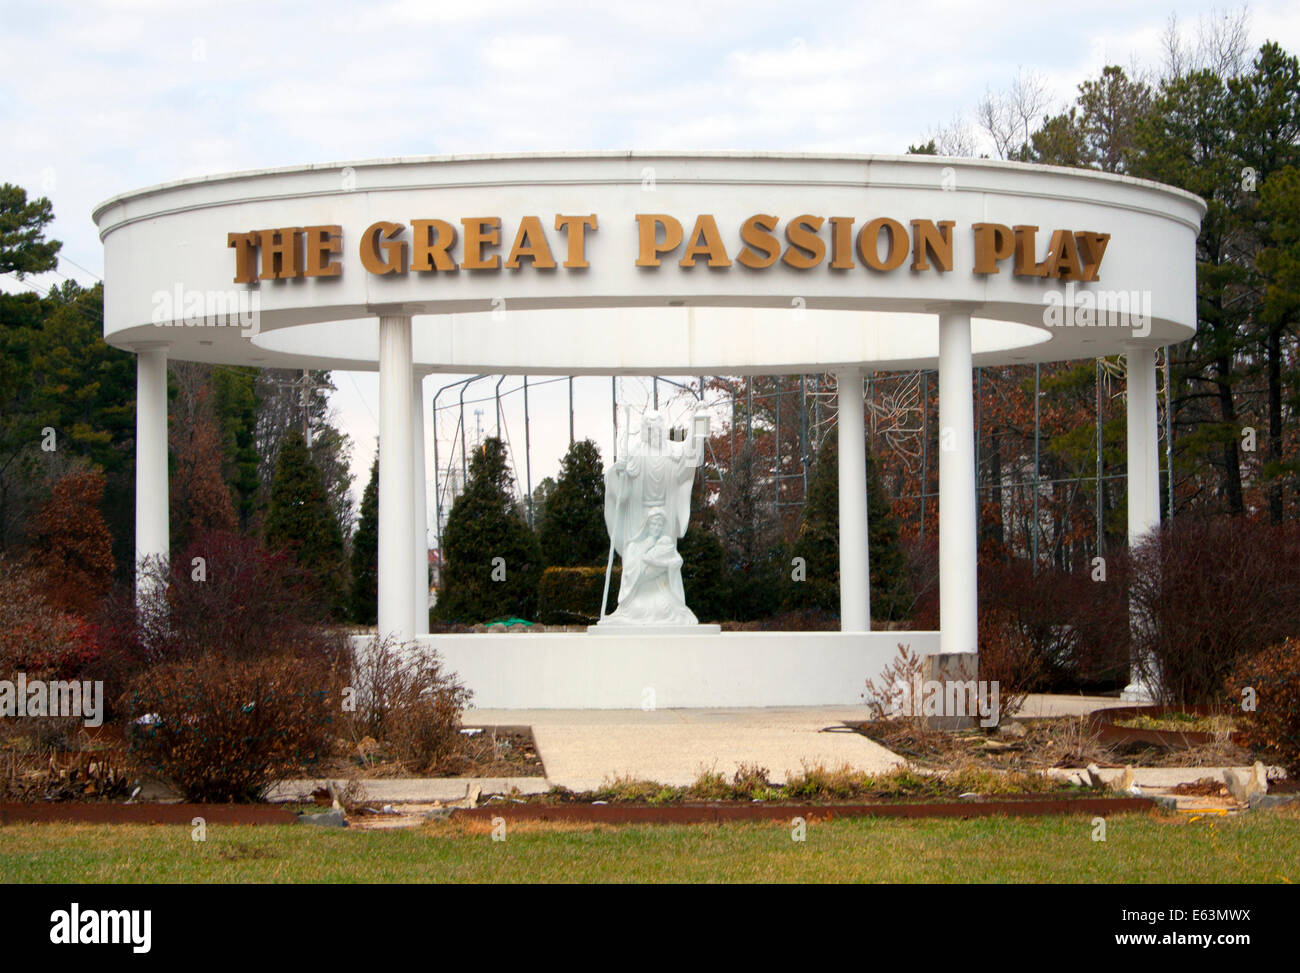 The Great Passion Play in Eureka Springs Arkansas Stock Photo